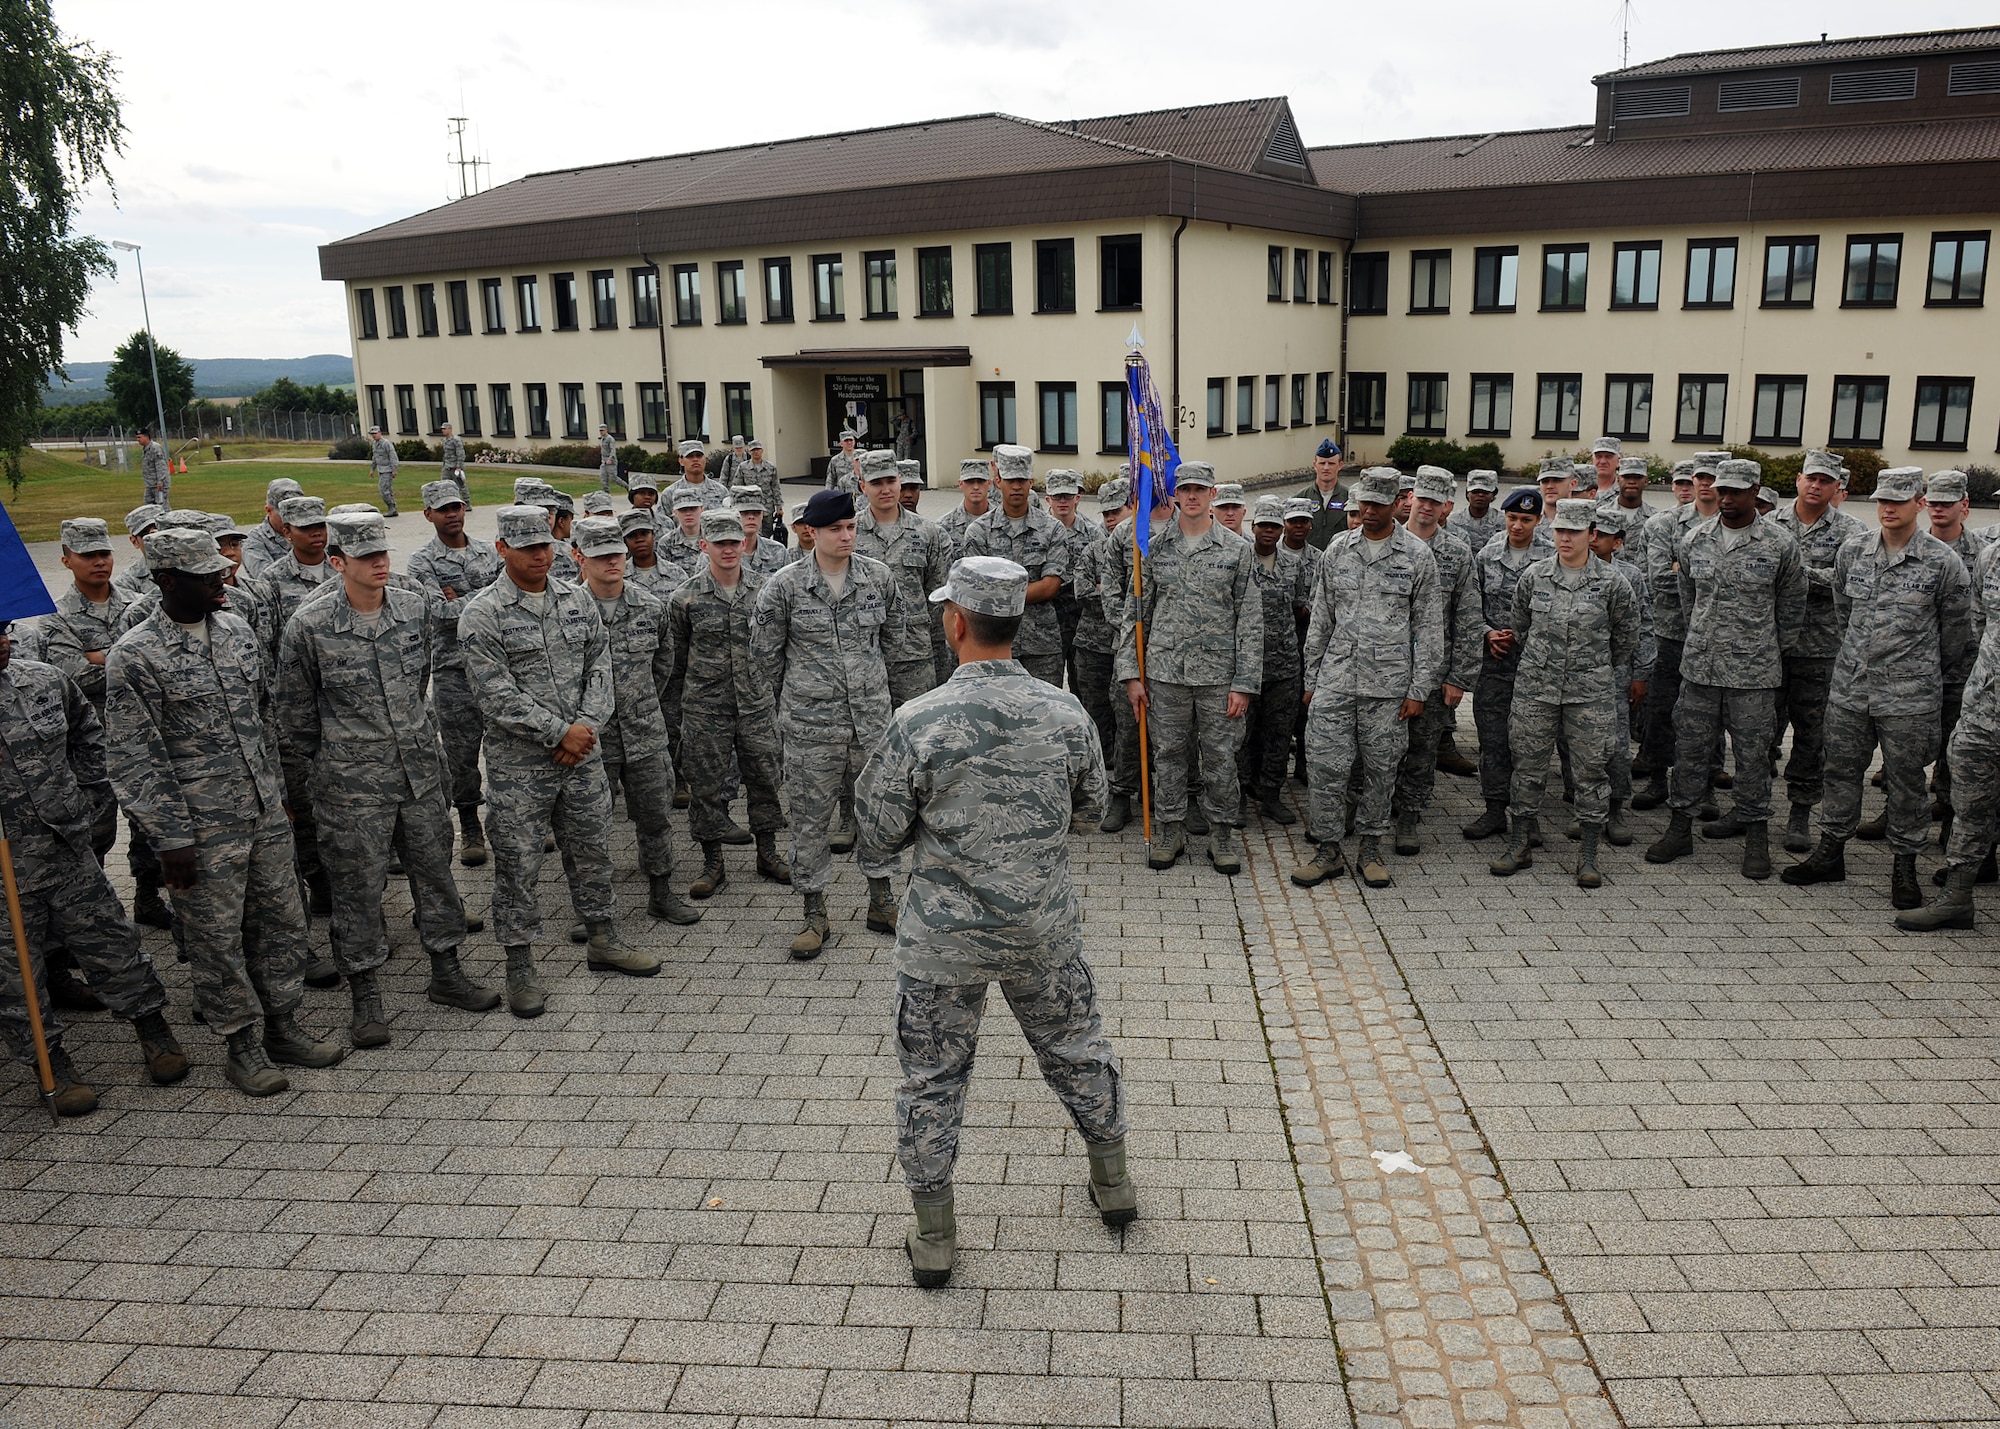 SPANGDAHLEM AIR BASE, Germany – U.S. Air Force Col. David Julazadeh, 52nd Fighter Wing commander, speaks with Spangdahlem Airmen about the importance of the military traditions after honoring Germany and the United States at a new wing retreat ceremony July 29, 2013. More than 100 Airmen participated in the ceremony, which will take place once a month during the summer. (U.S. Air Force photo by Staff Sgt. Daryl Knee/Released)